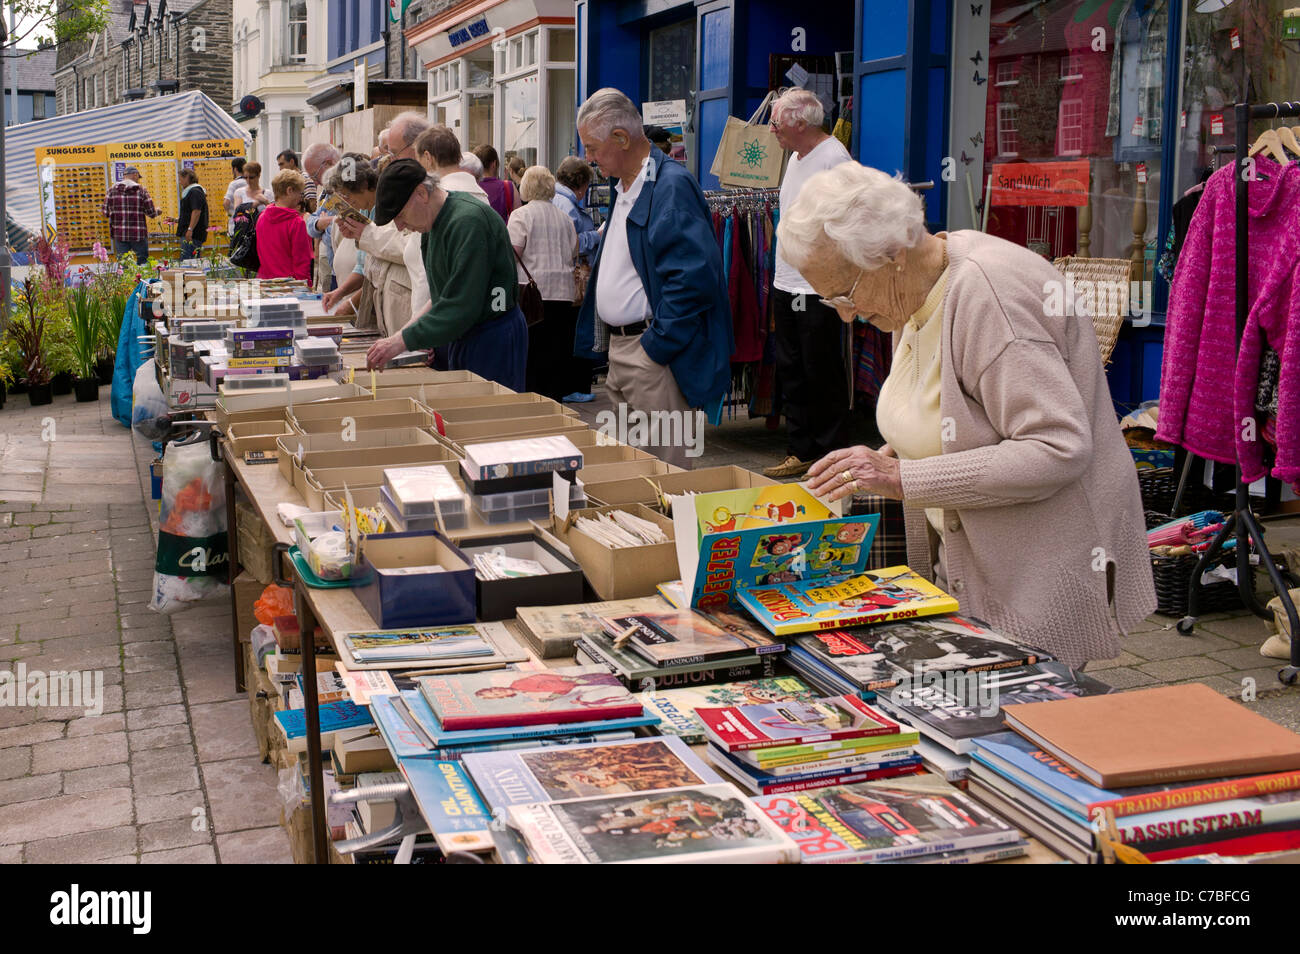 Mature female checks used books on an outdoor market stall, in the background bargain hunters check VHS tapes and magazines. Stock Photo